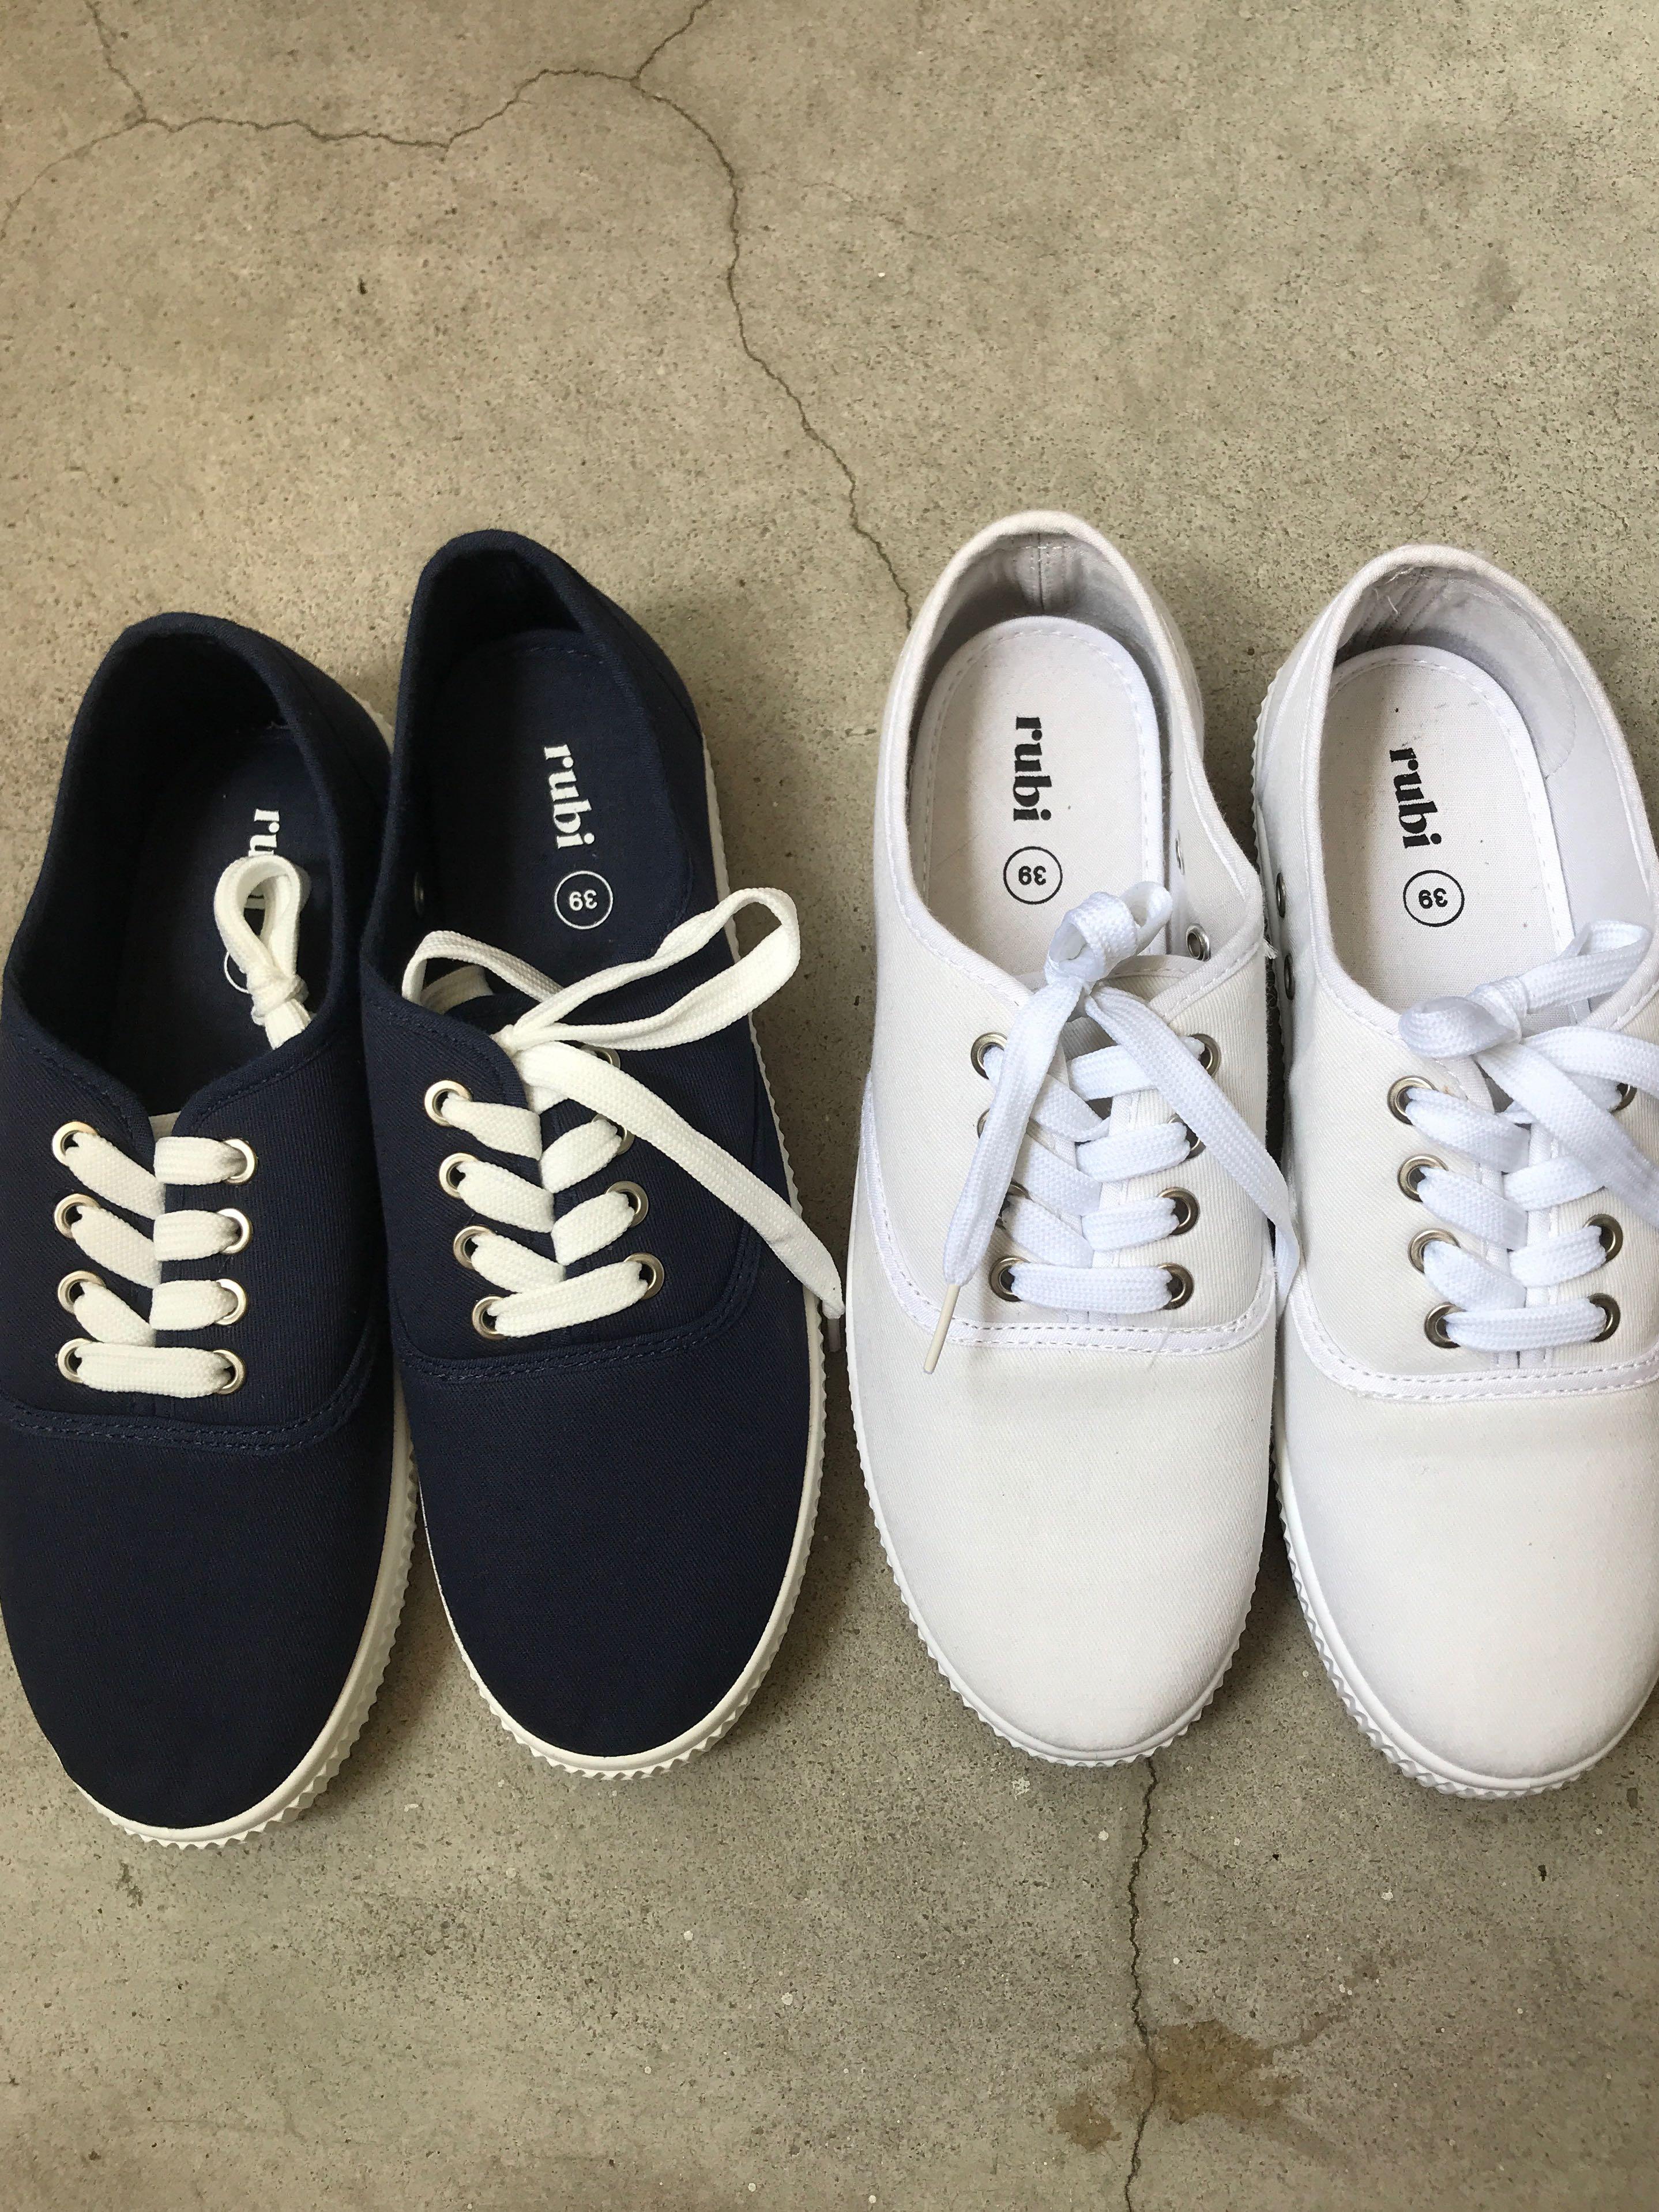 Rubi Sneakers Navy Blue, And Cream, size 42 VGC Pre-owned Great Condition |  Navy blue, Rubi, Blue